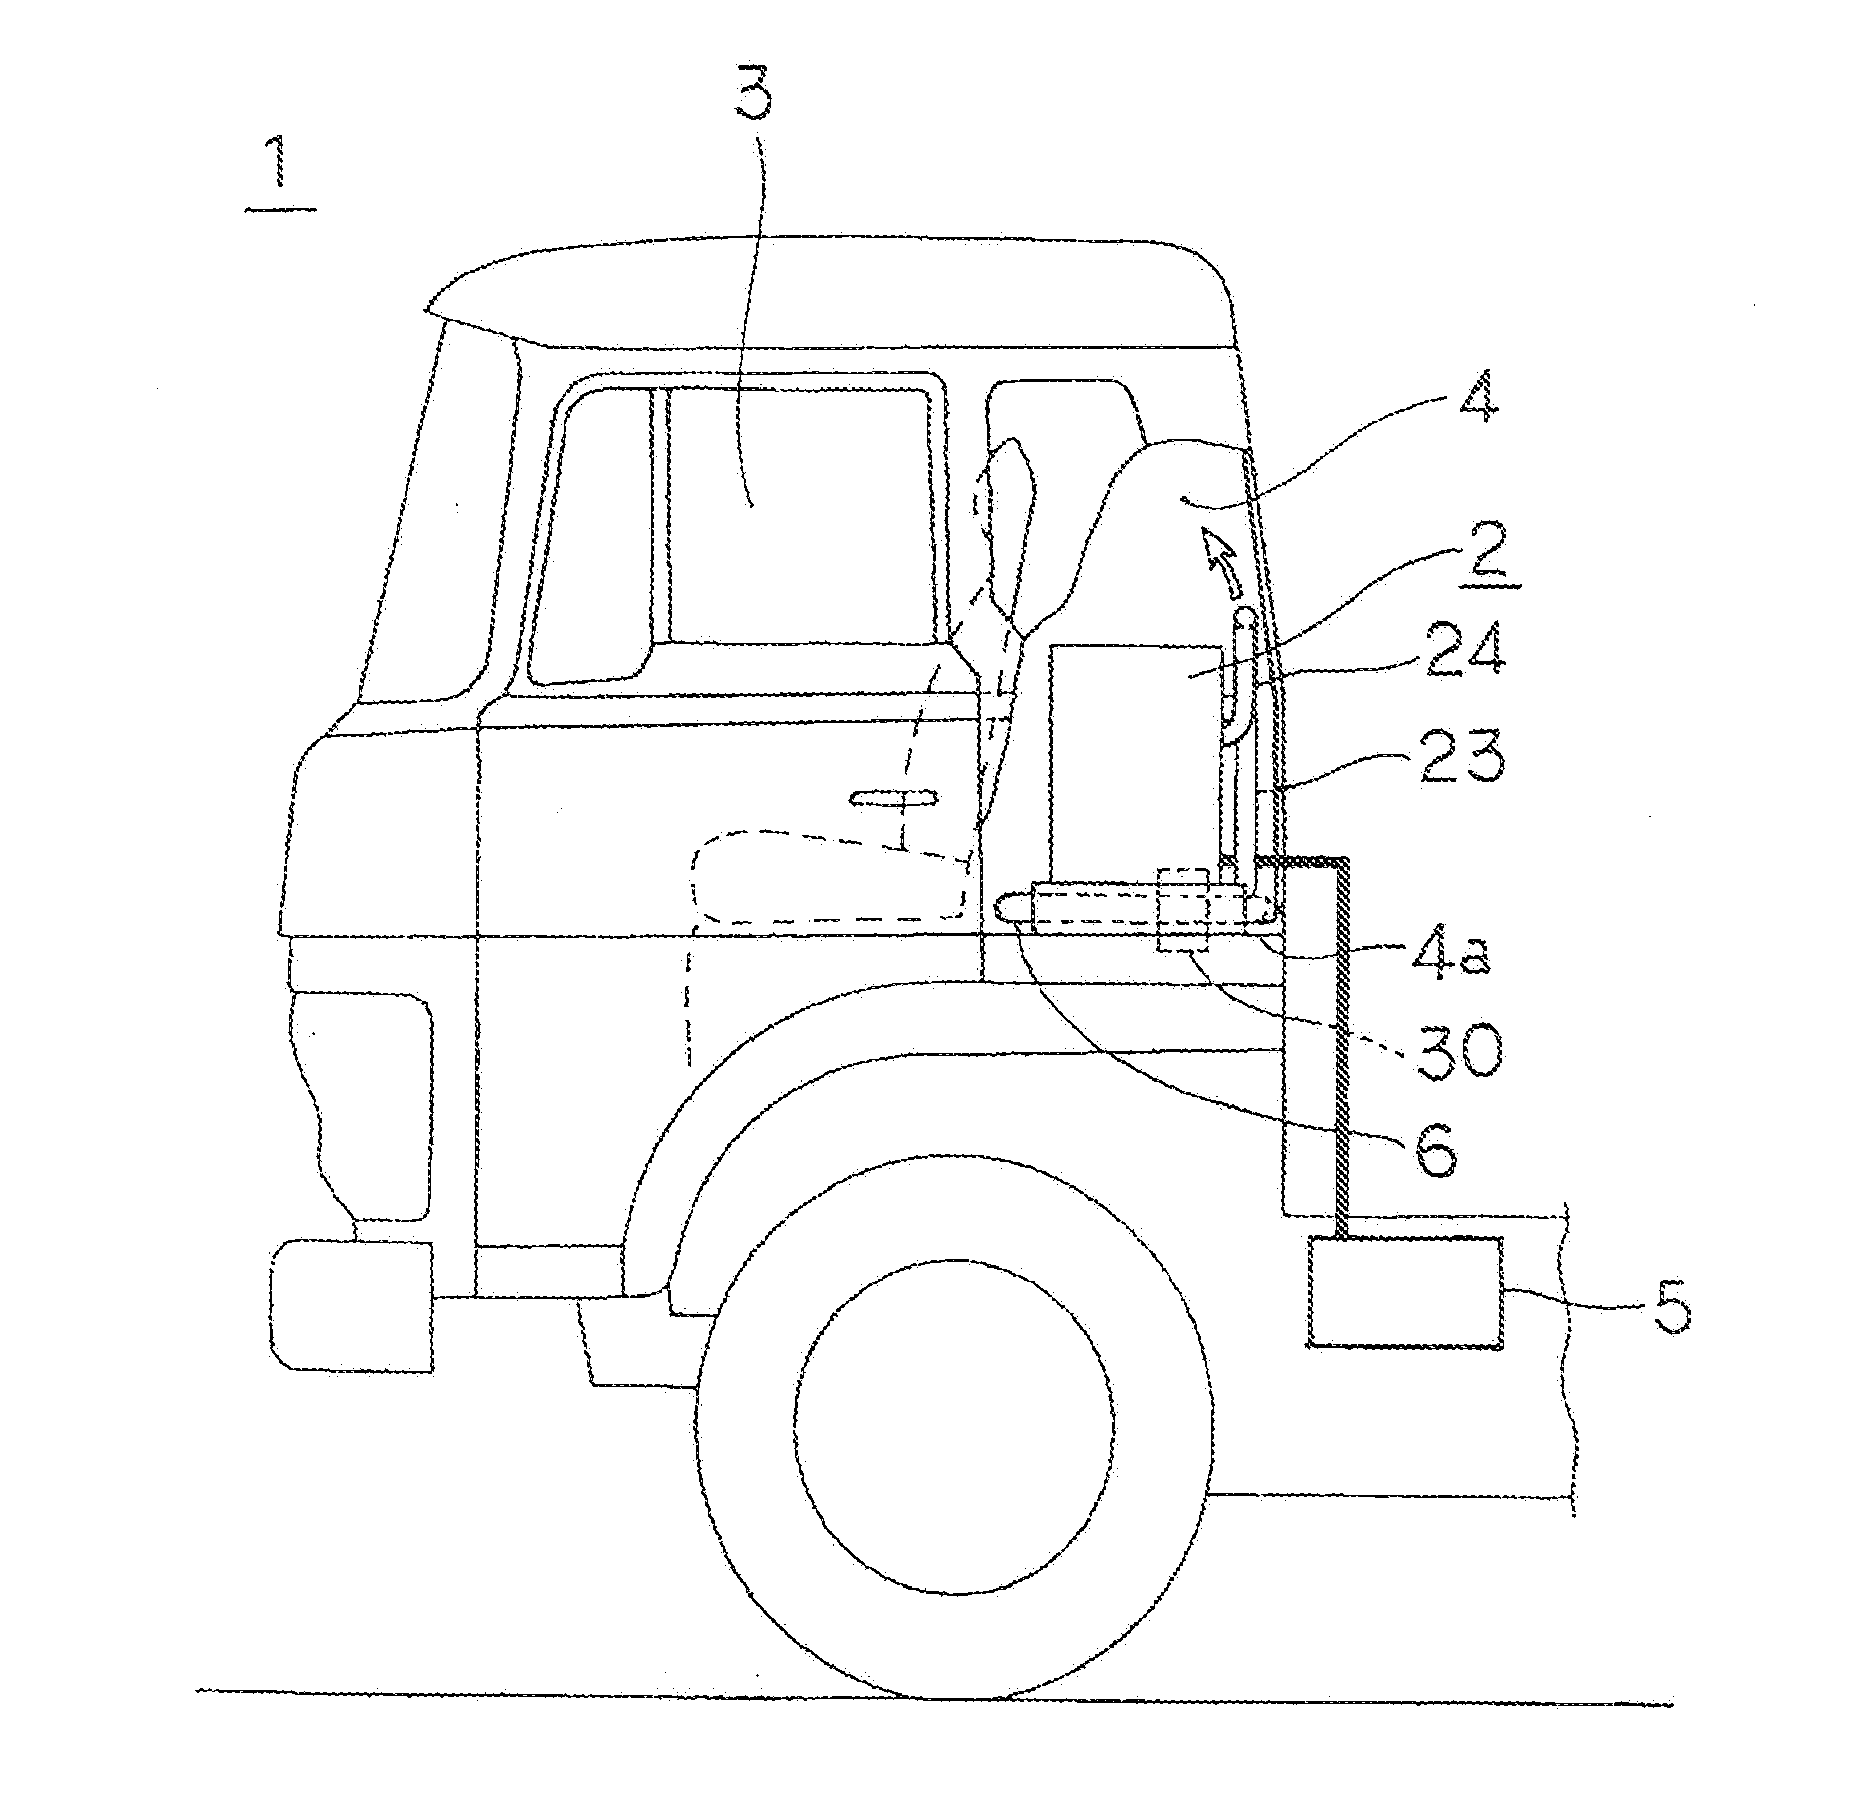 Vehicle-mounted temperature control device